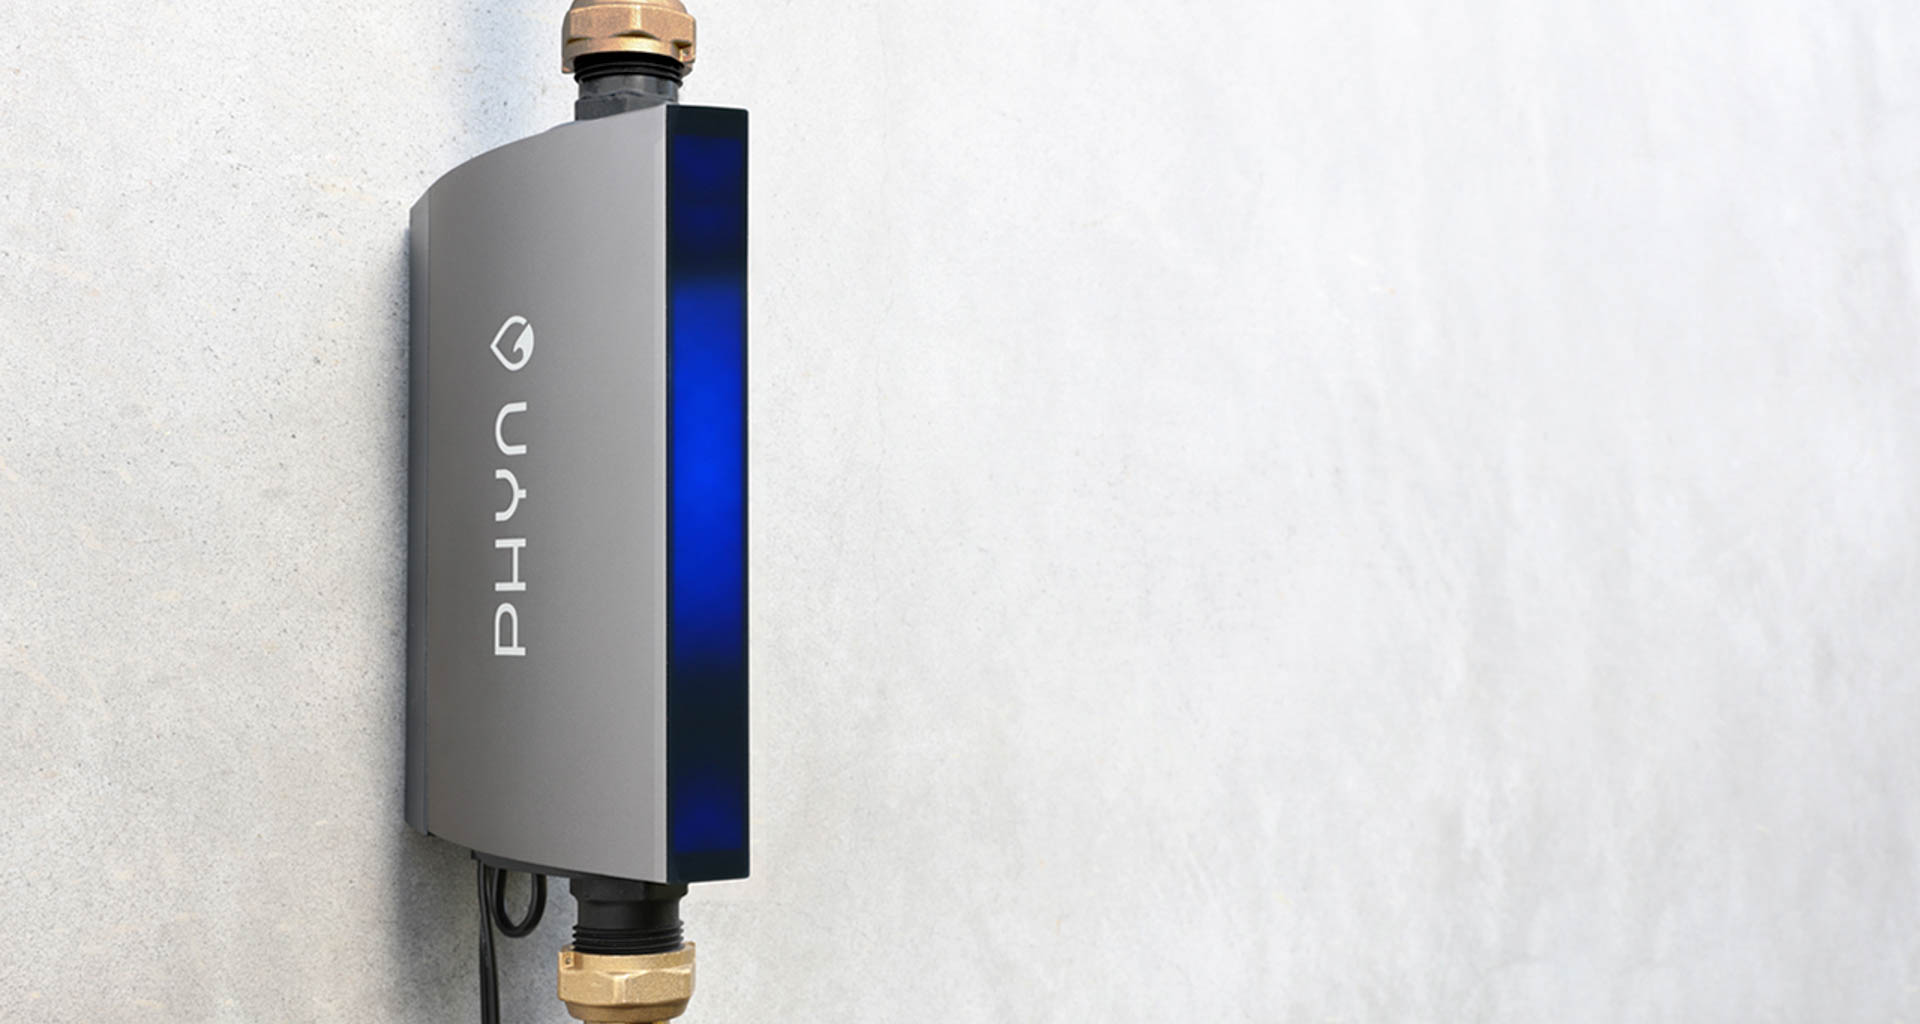 Phyn Plus smart water assistant. Image: Phyn.